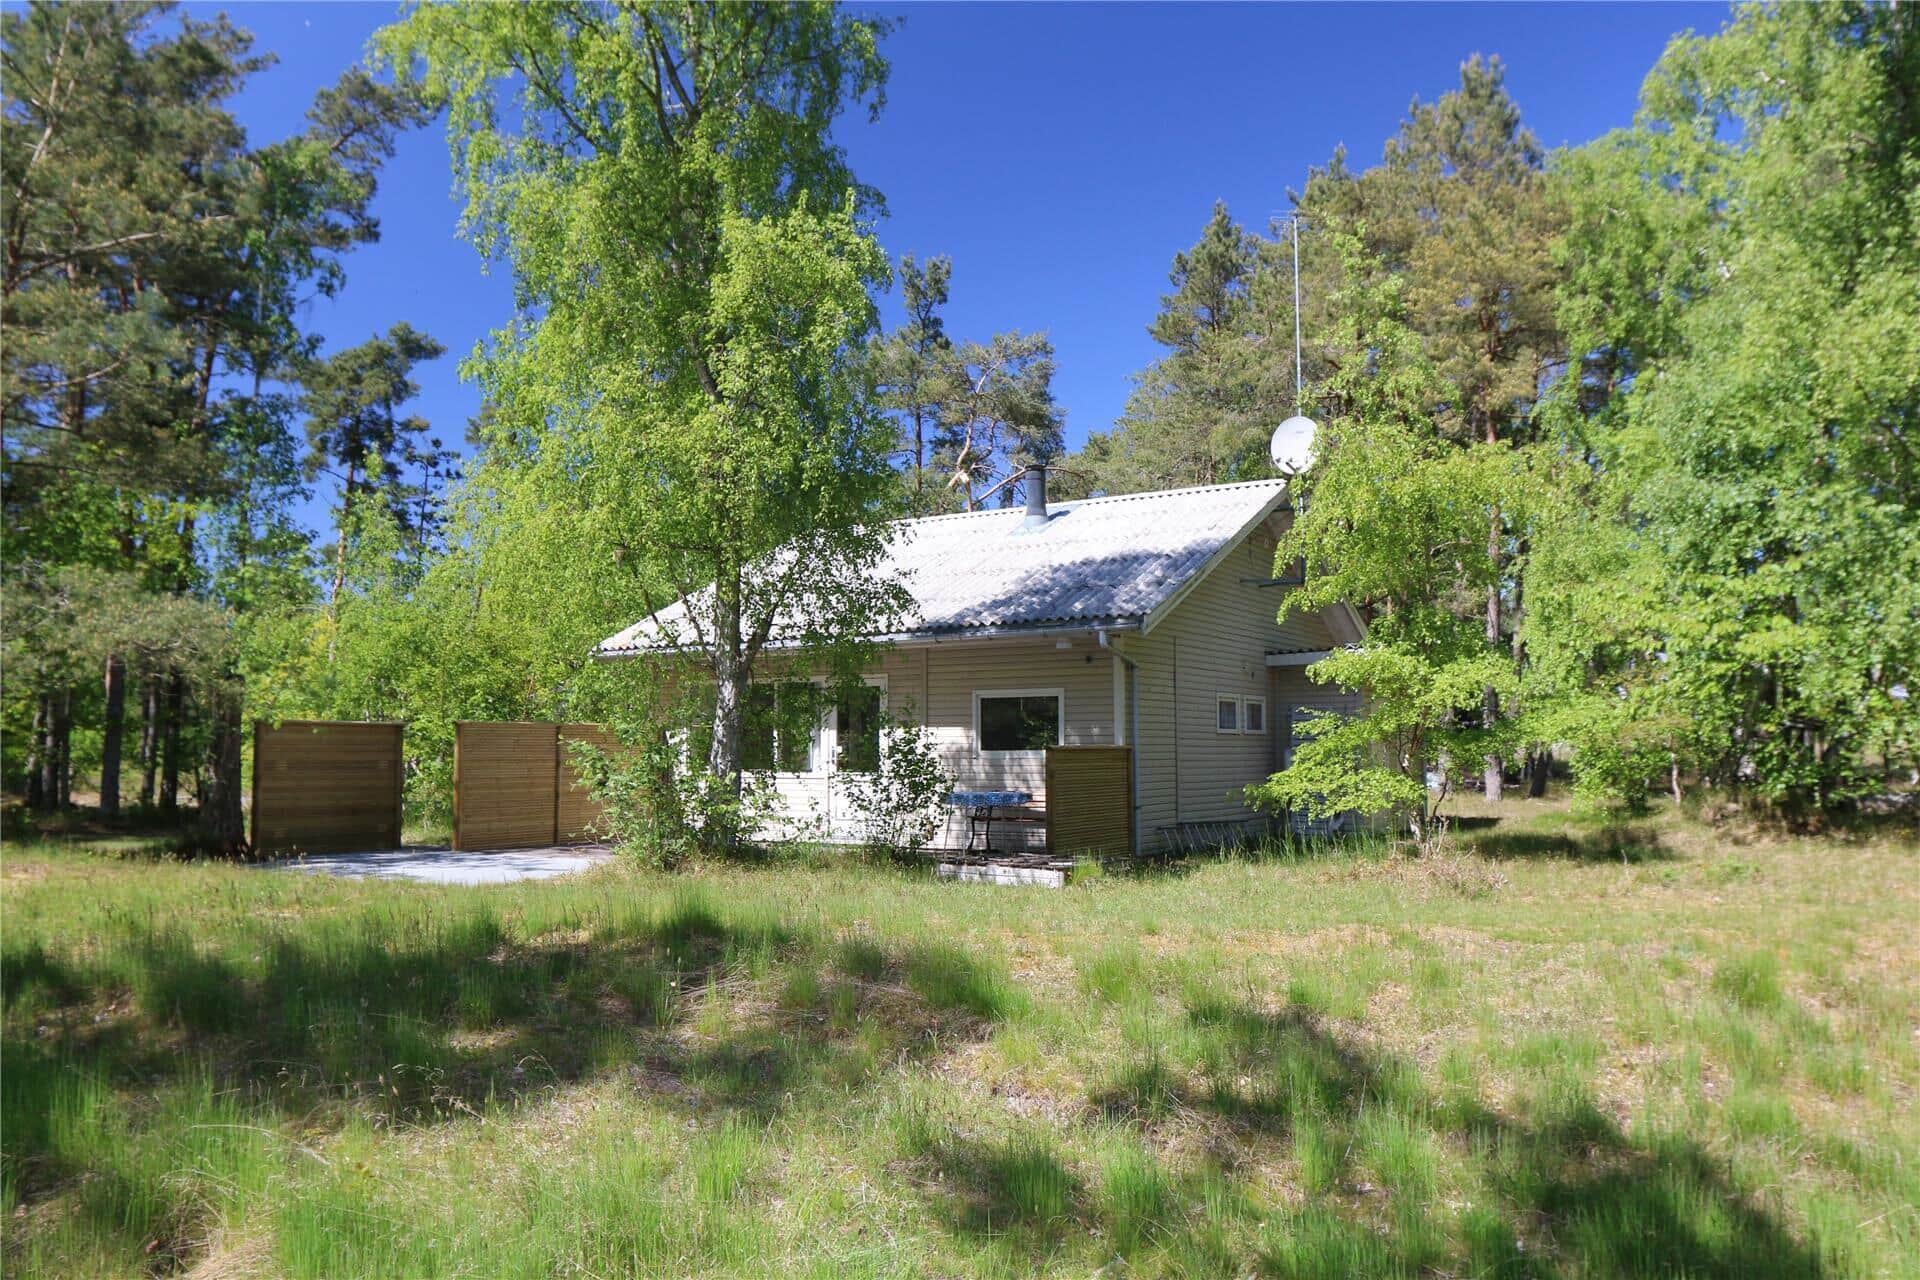 Image 0-10 Holiday-home 4716, Boderne 95, DK - 3720 Aakirkeby